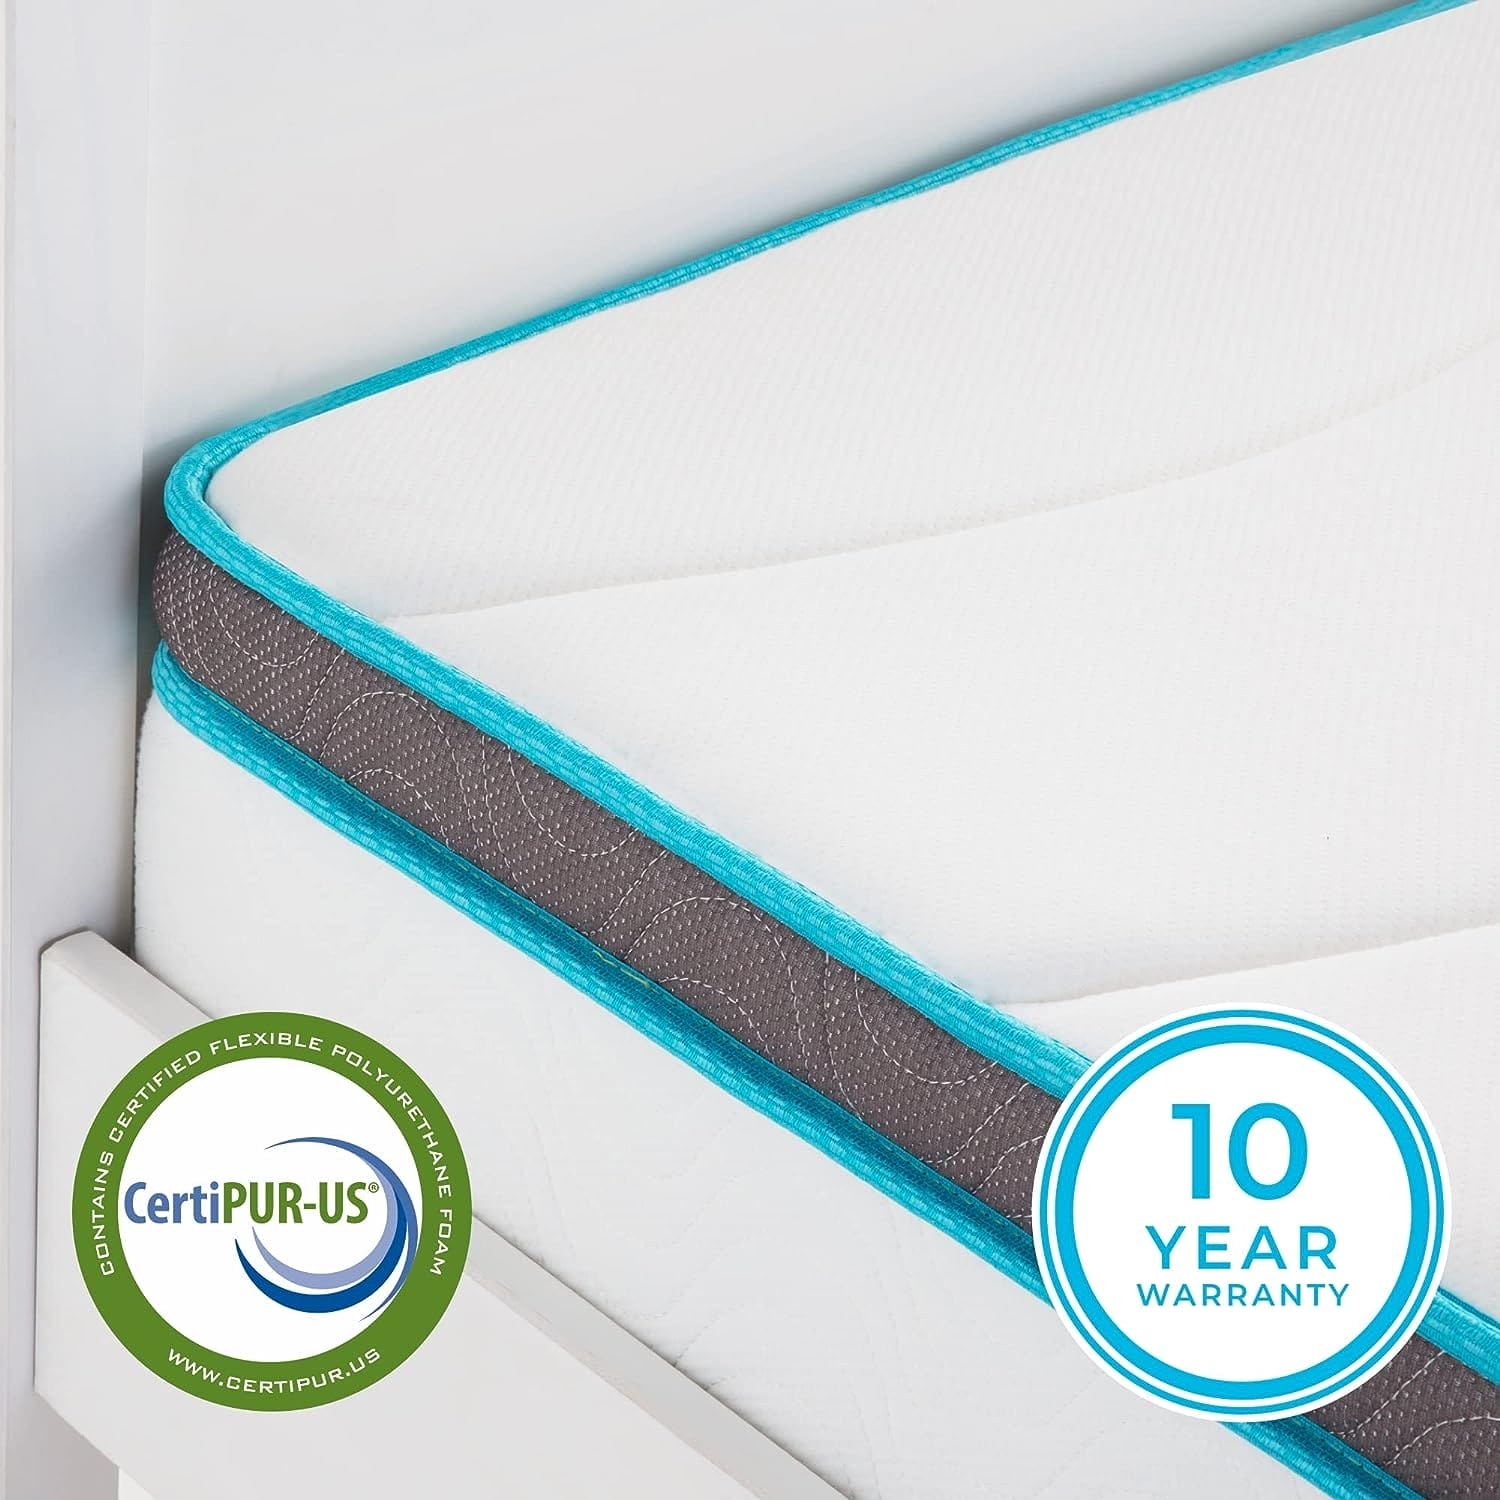 LINENSPA Mattress Review: Is It the Perfect Choice for You?